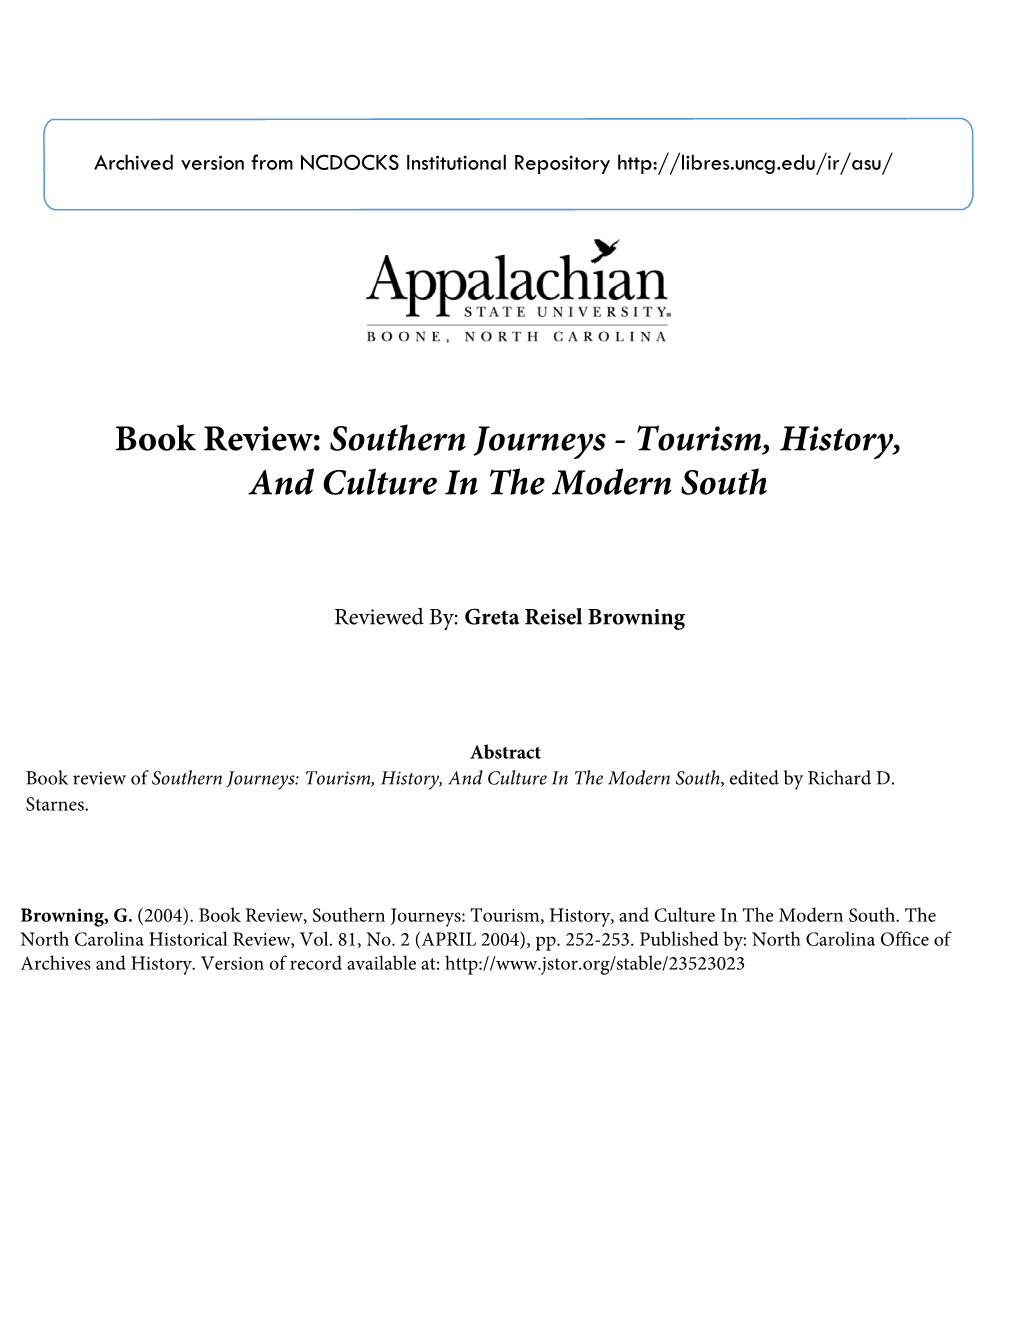 Southern Journeys - Tourism, History, and Culture in the Modern South